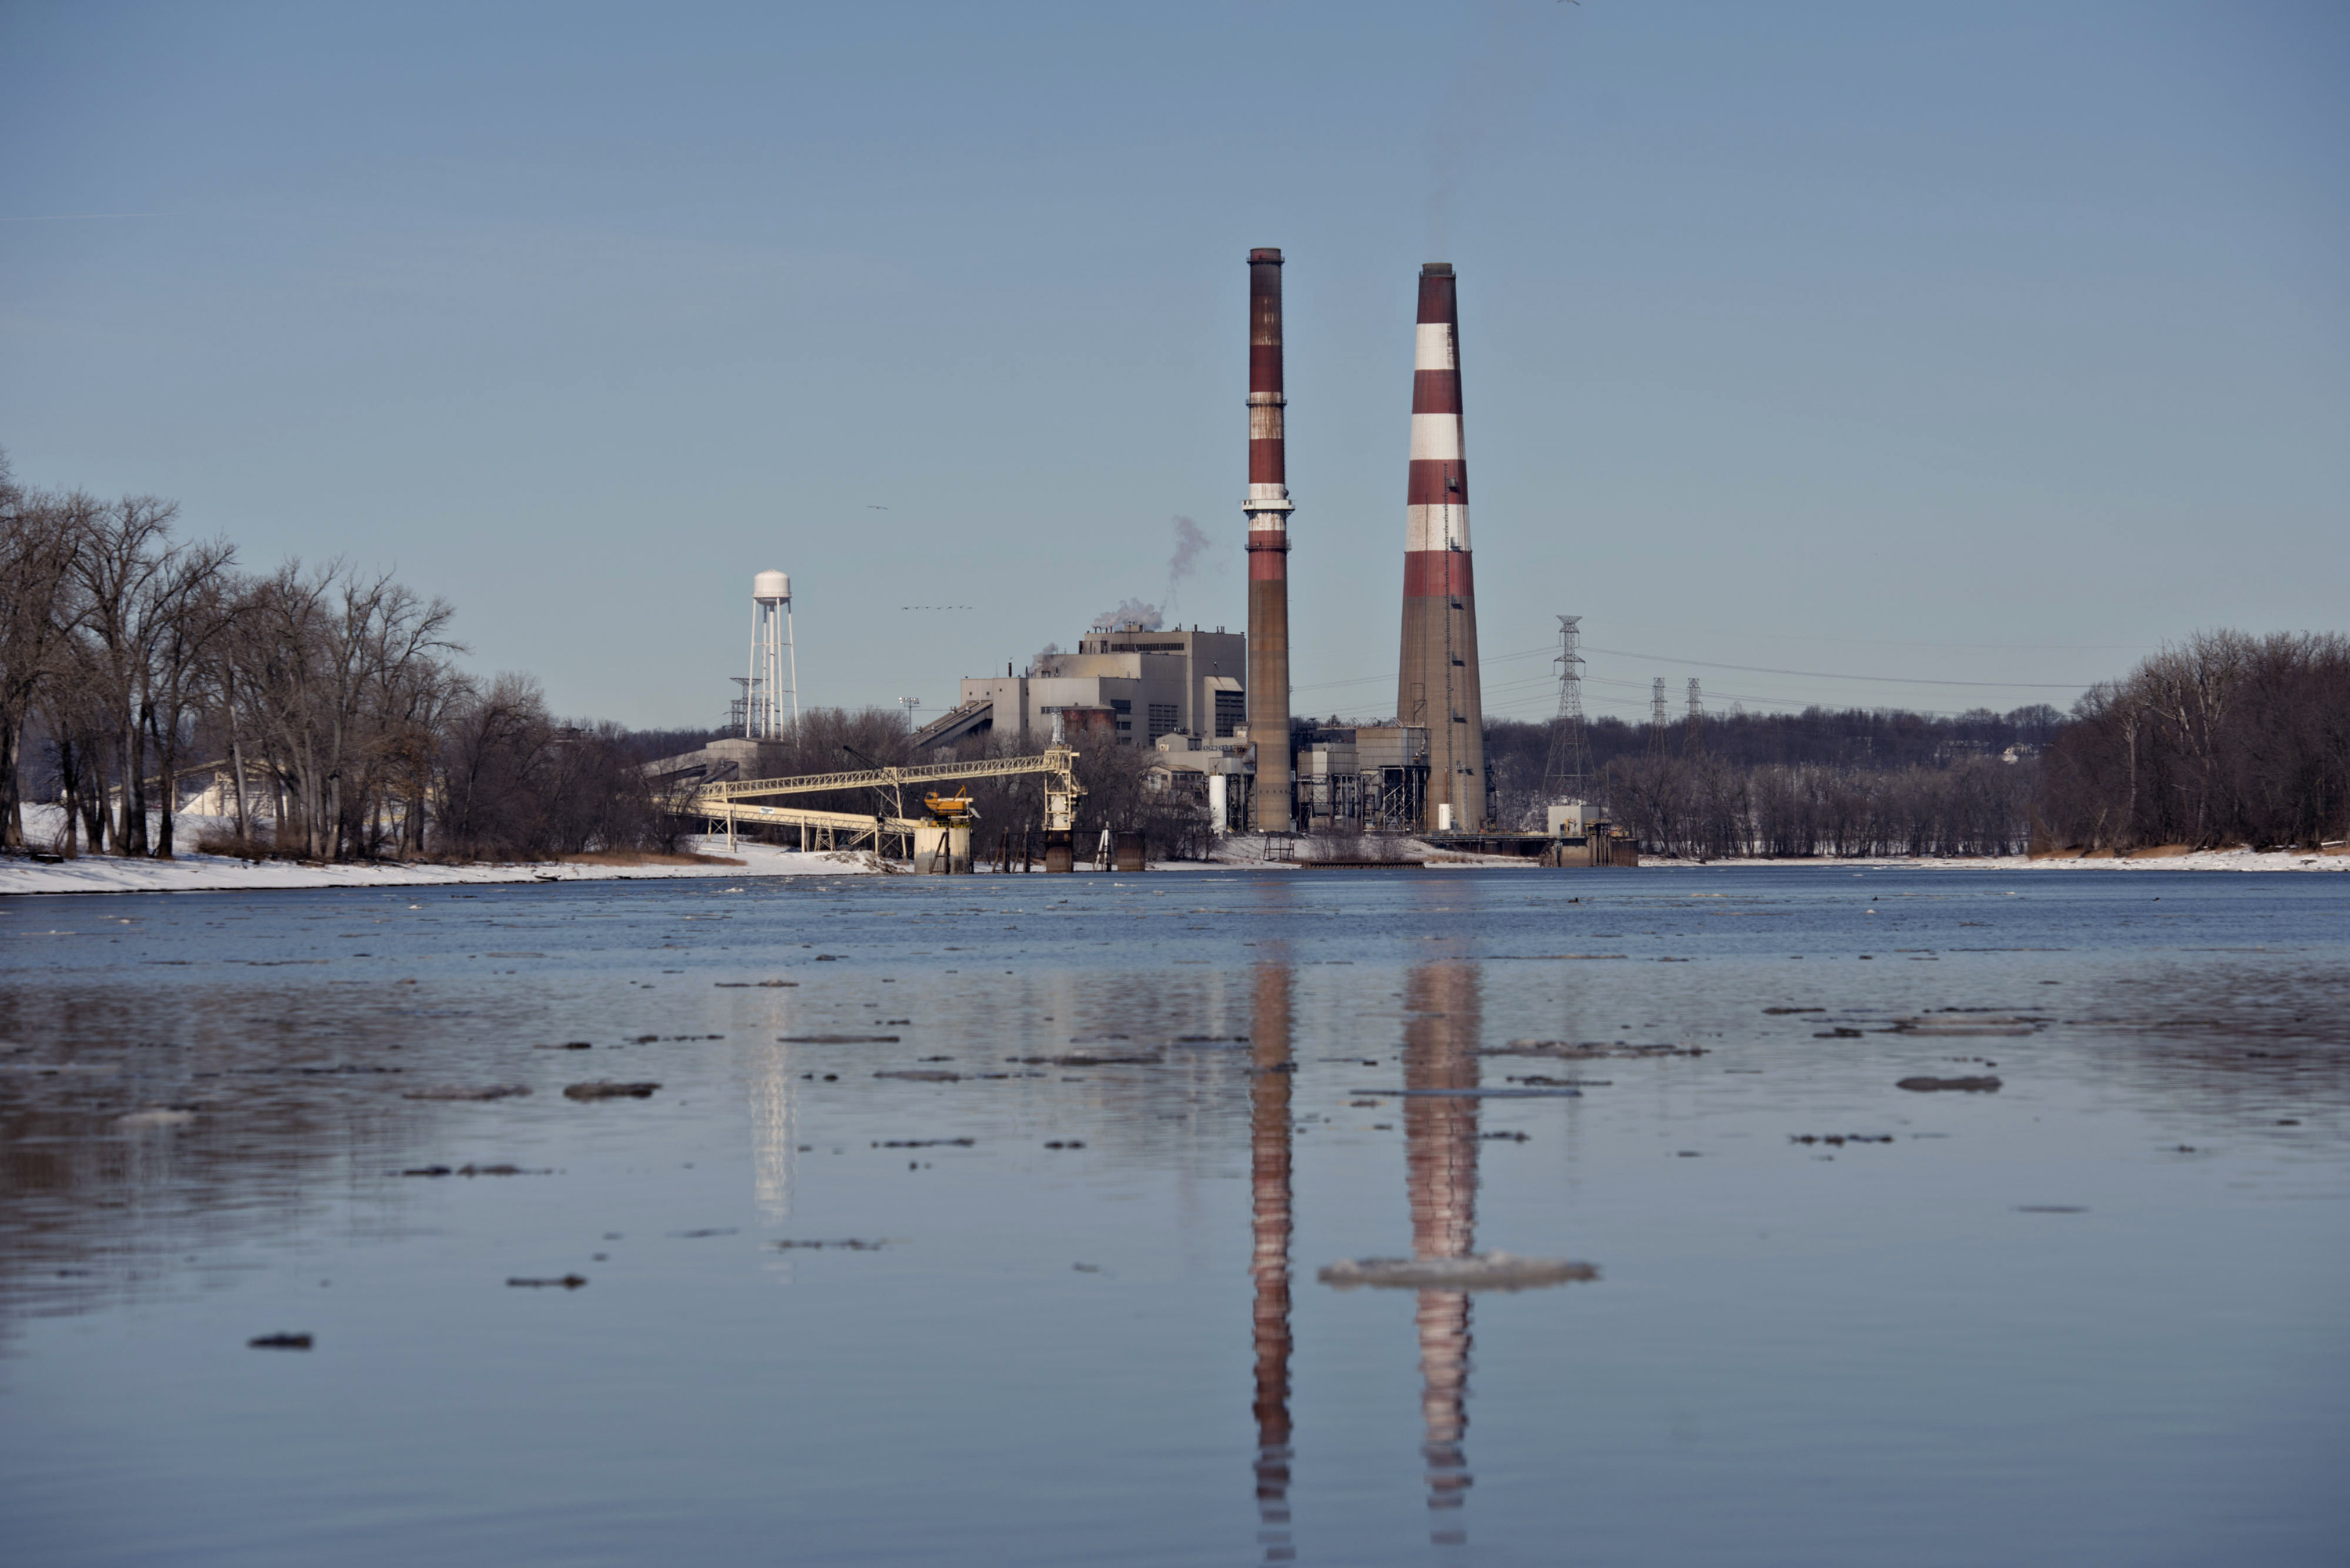 The Dynegy Inc. E.D. Edwards Power Station stands on the banks of the Illinois River in Bartonville, Illinois, on Feb. 19, 2014. Photographer: Daniel Acker/Bloomberg